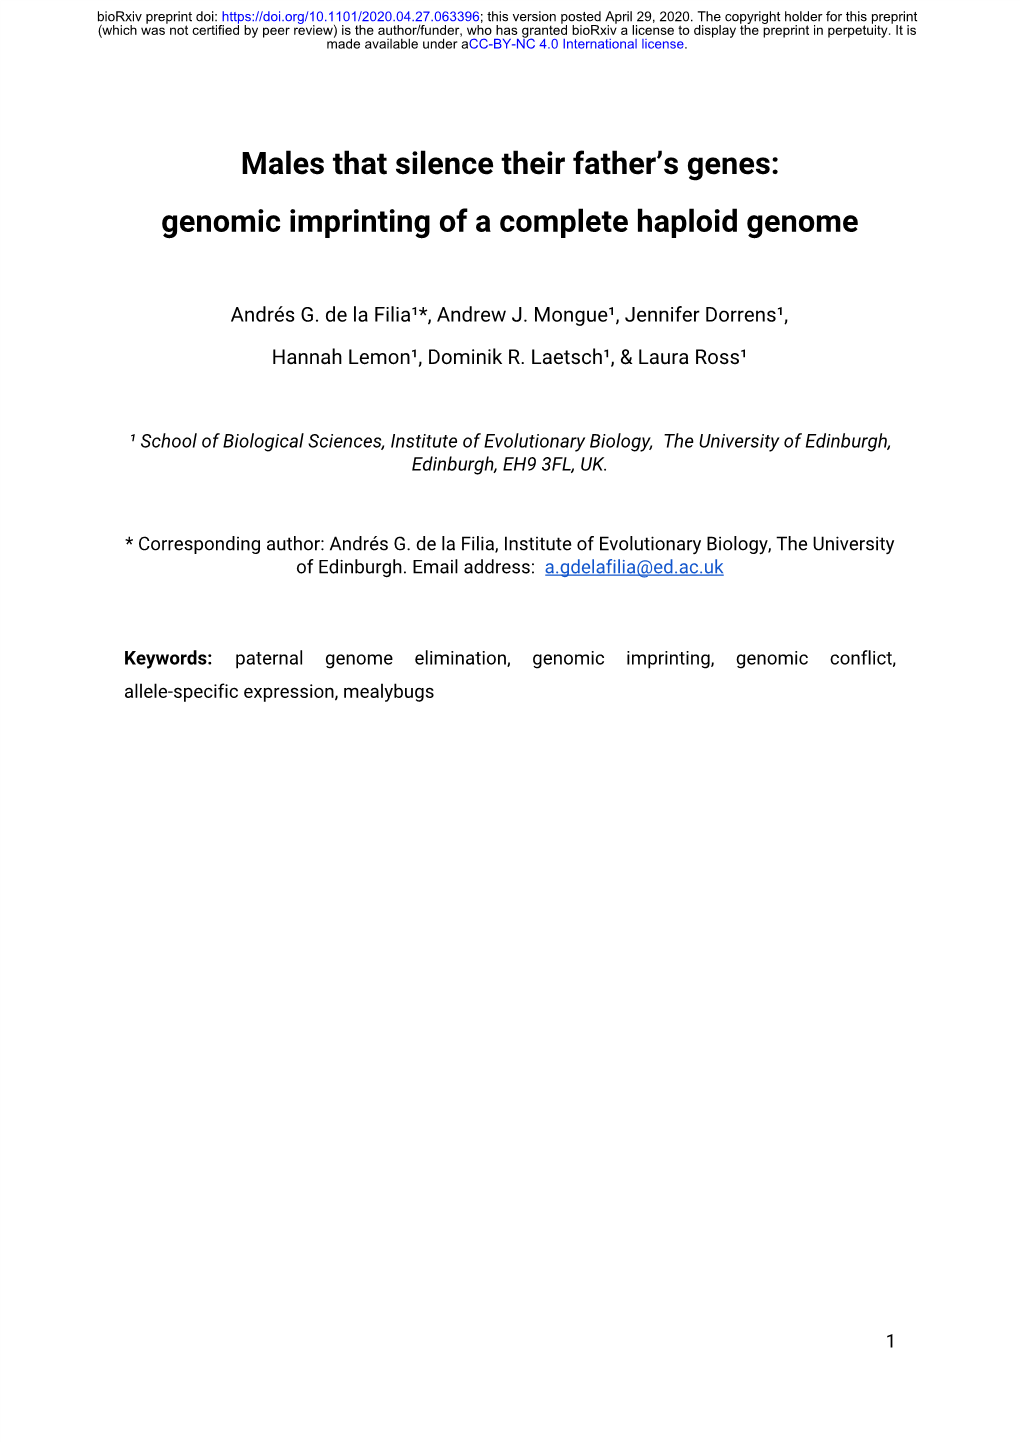 Genomic Imprinting of a Complete Haploid Genome